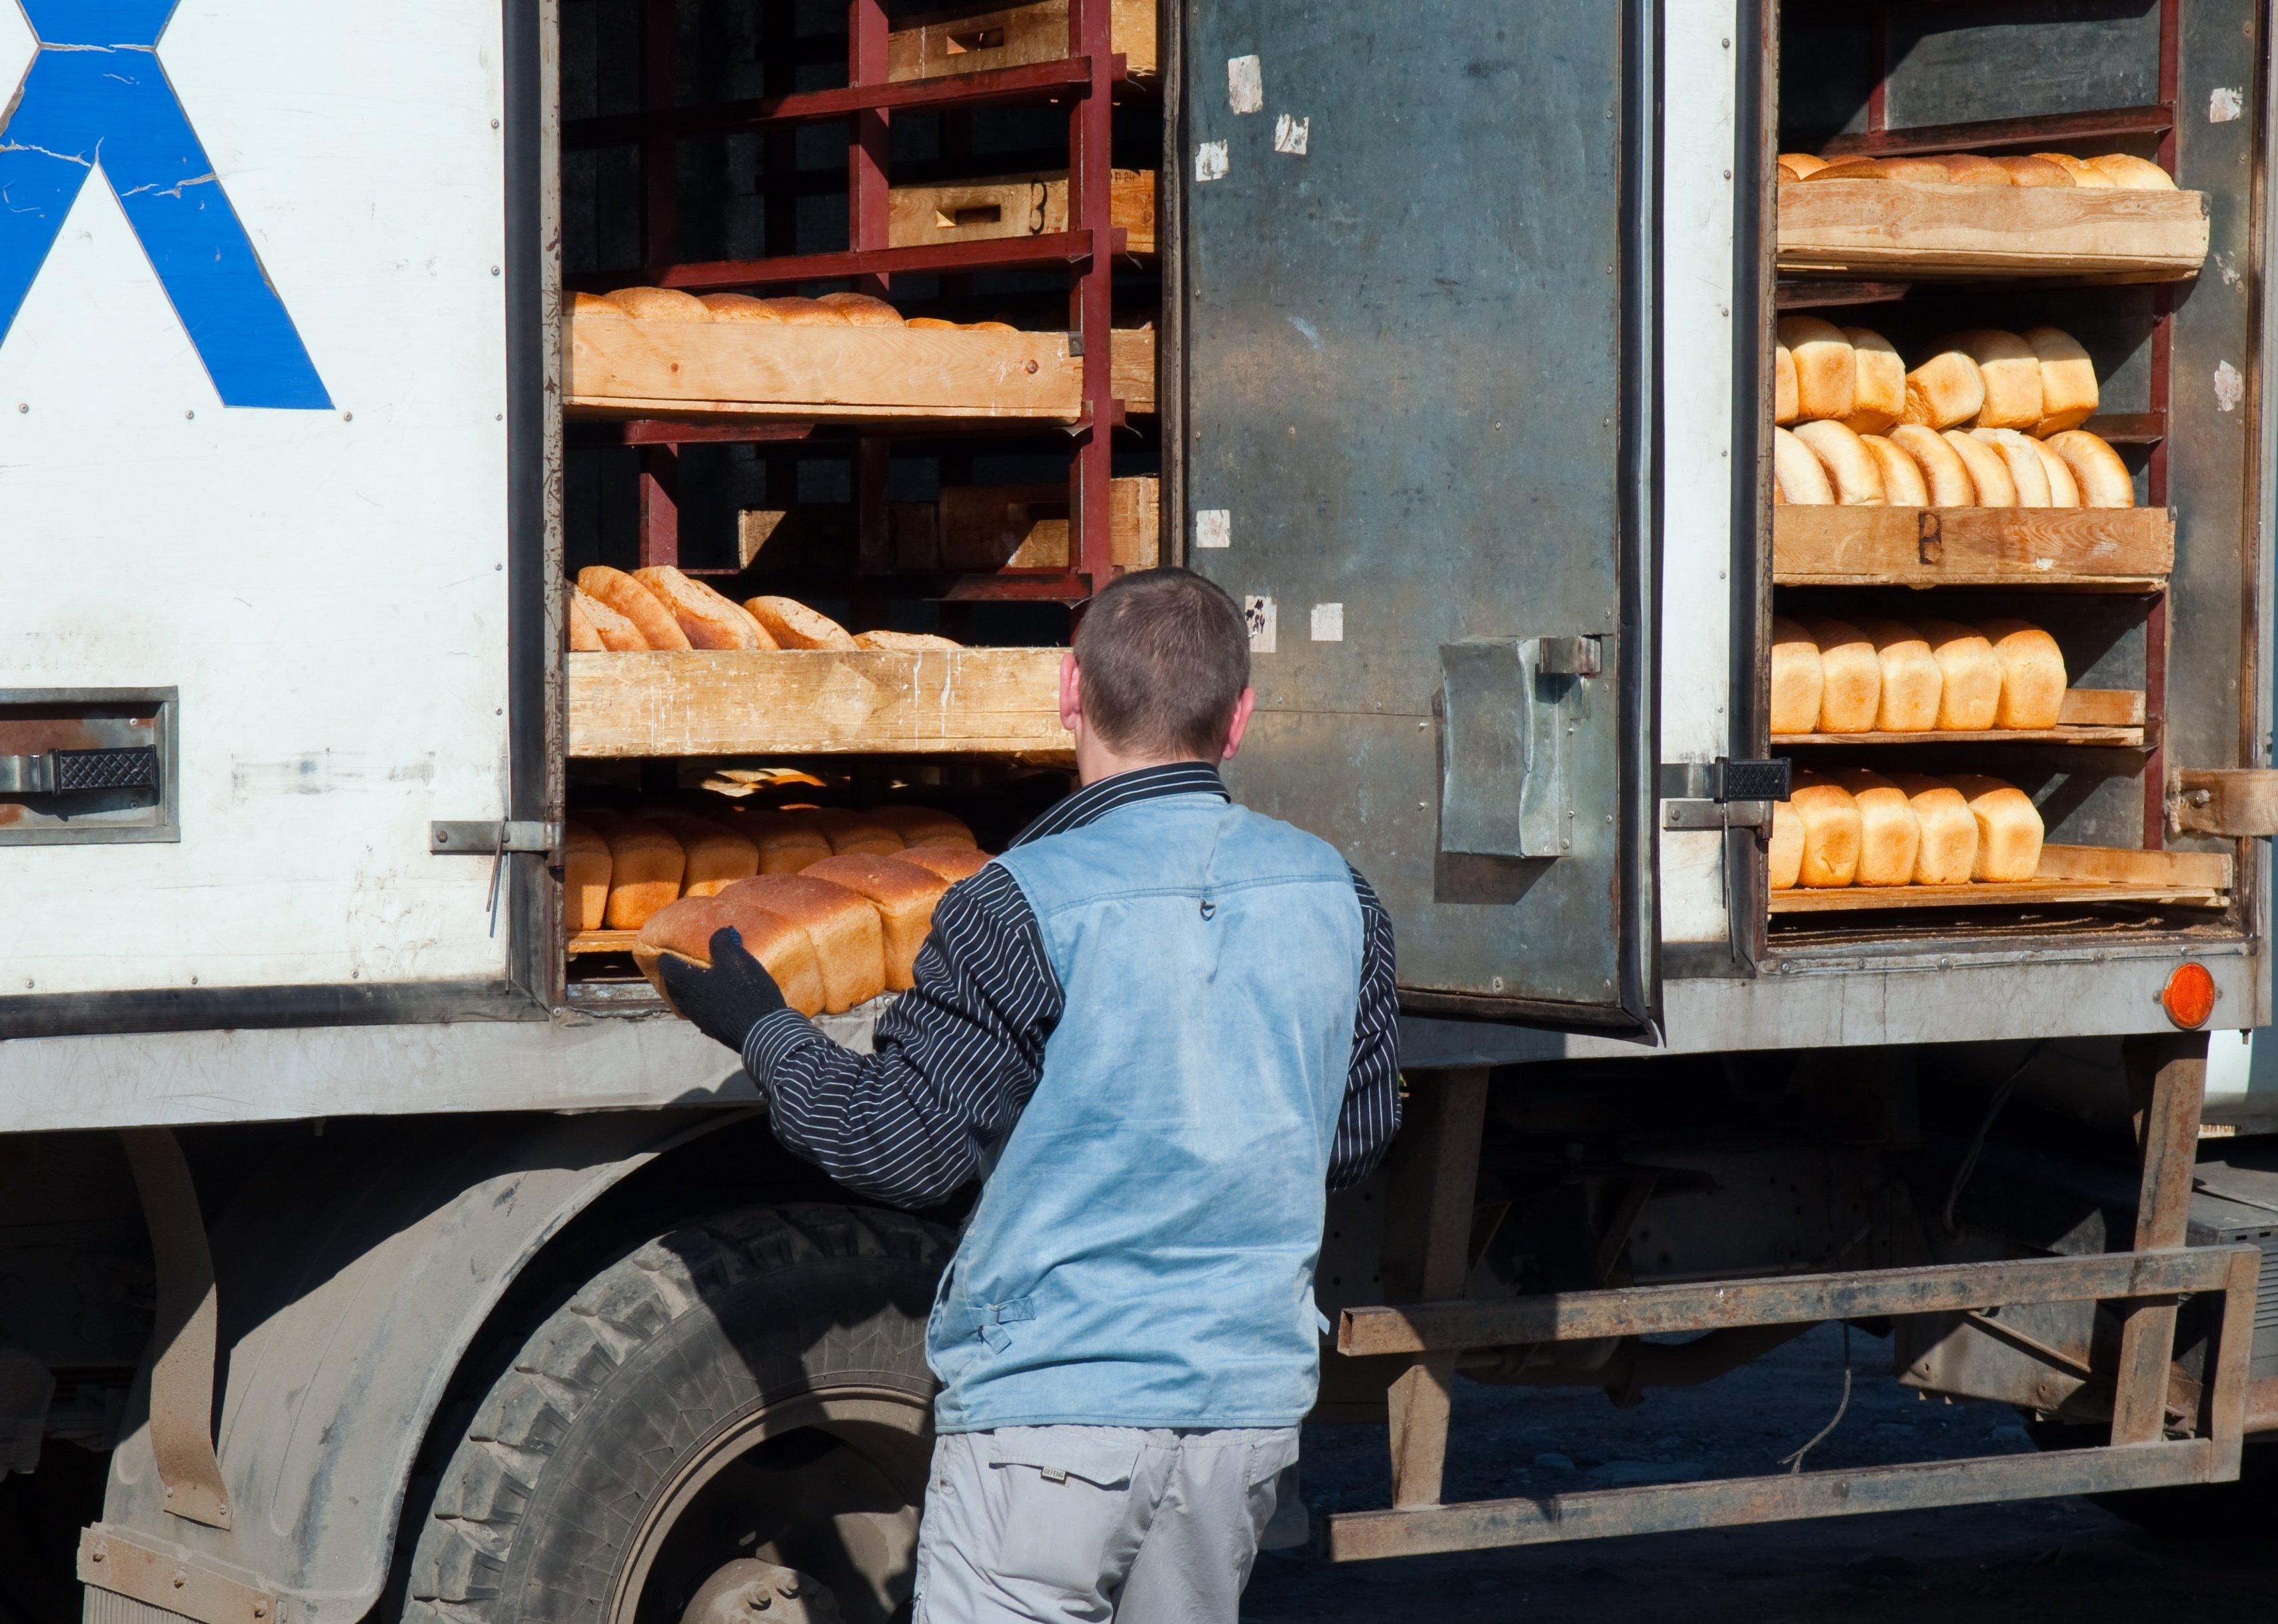 Truck Drivers or Bakery Workers: SCOTUS Will Decide